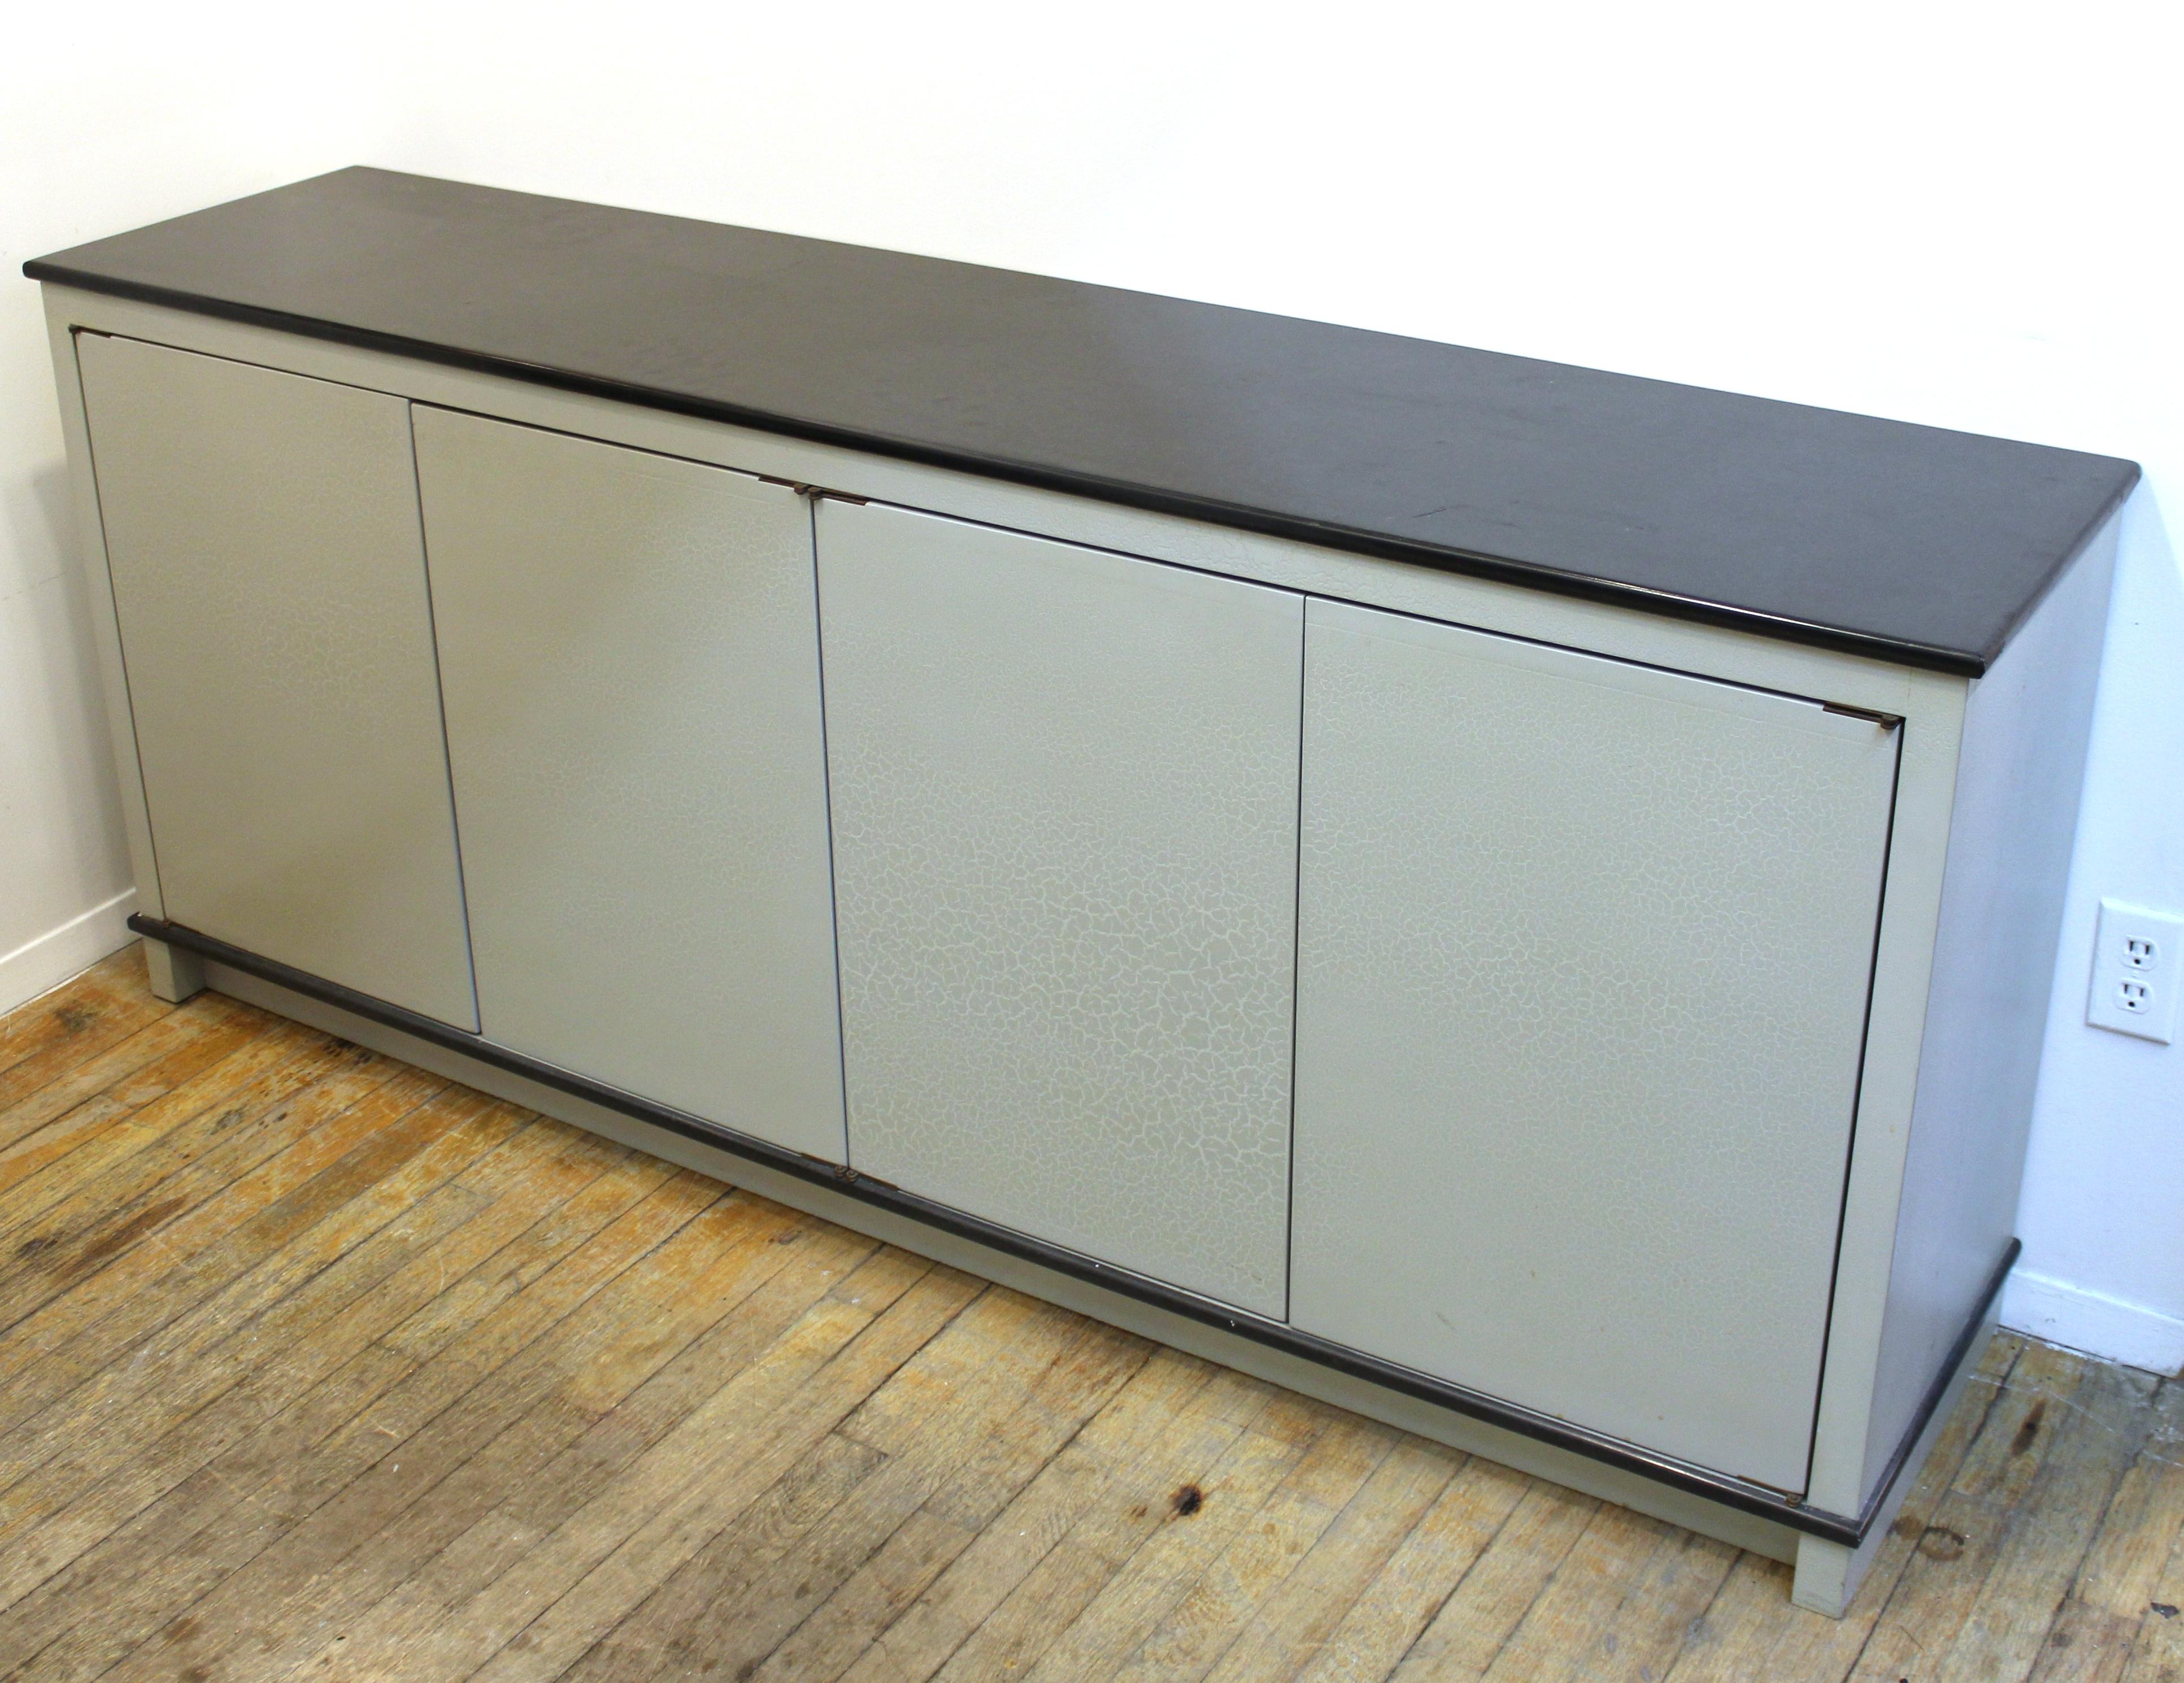 American Modern storage cabinet with craquelure surface. The piece has four hinged doors with a grey craquelure surface and a black top. It was likely made during the 1980s in the United States and is in great vintage condition, with some